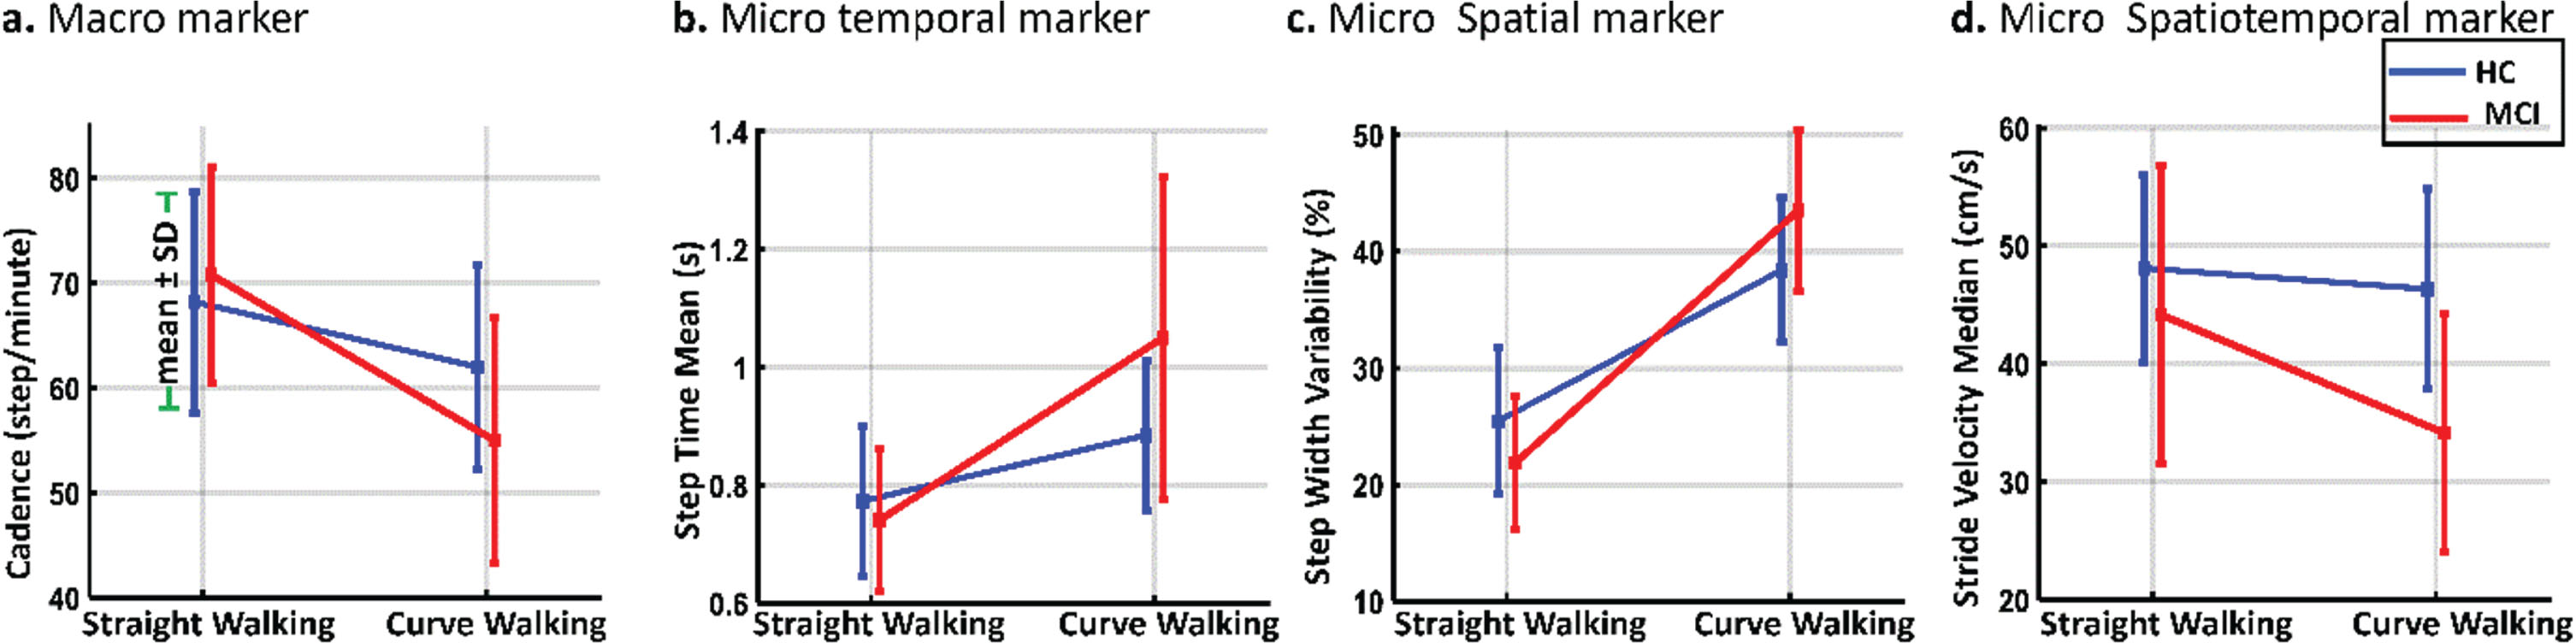 Effect of changing from straight to curve walking on the performance of MCI and HC participants.